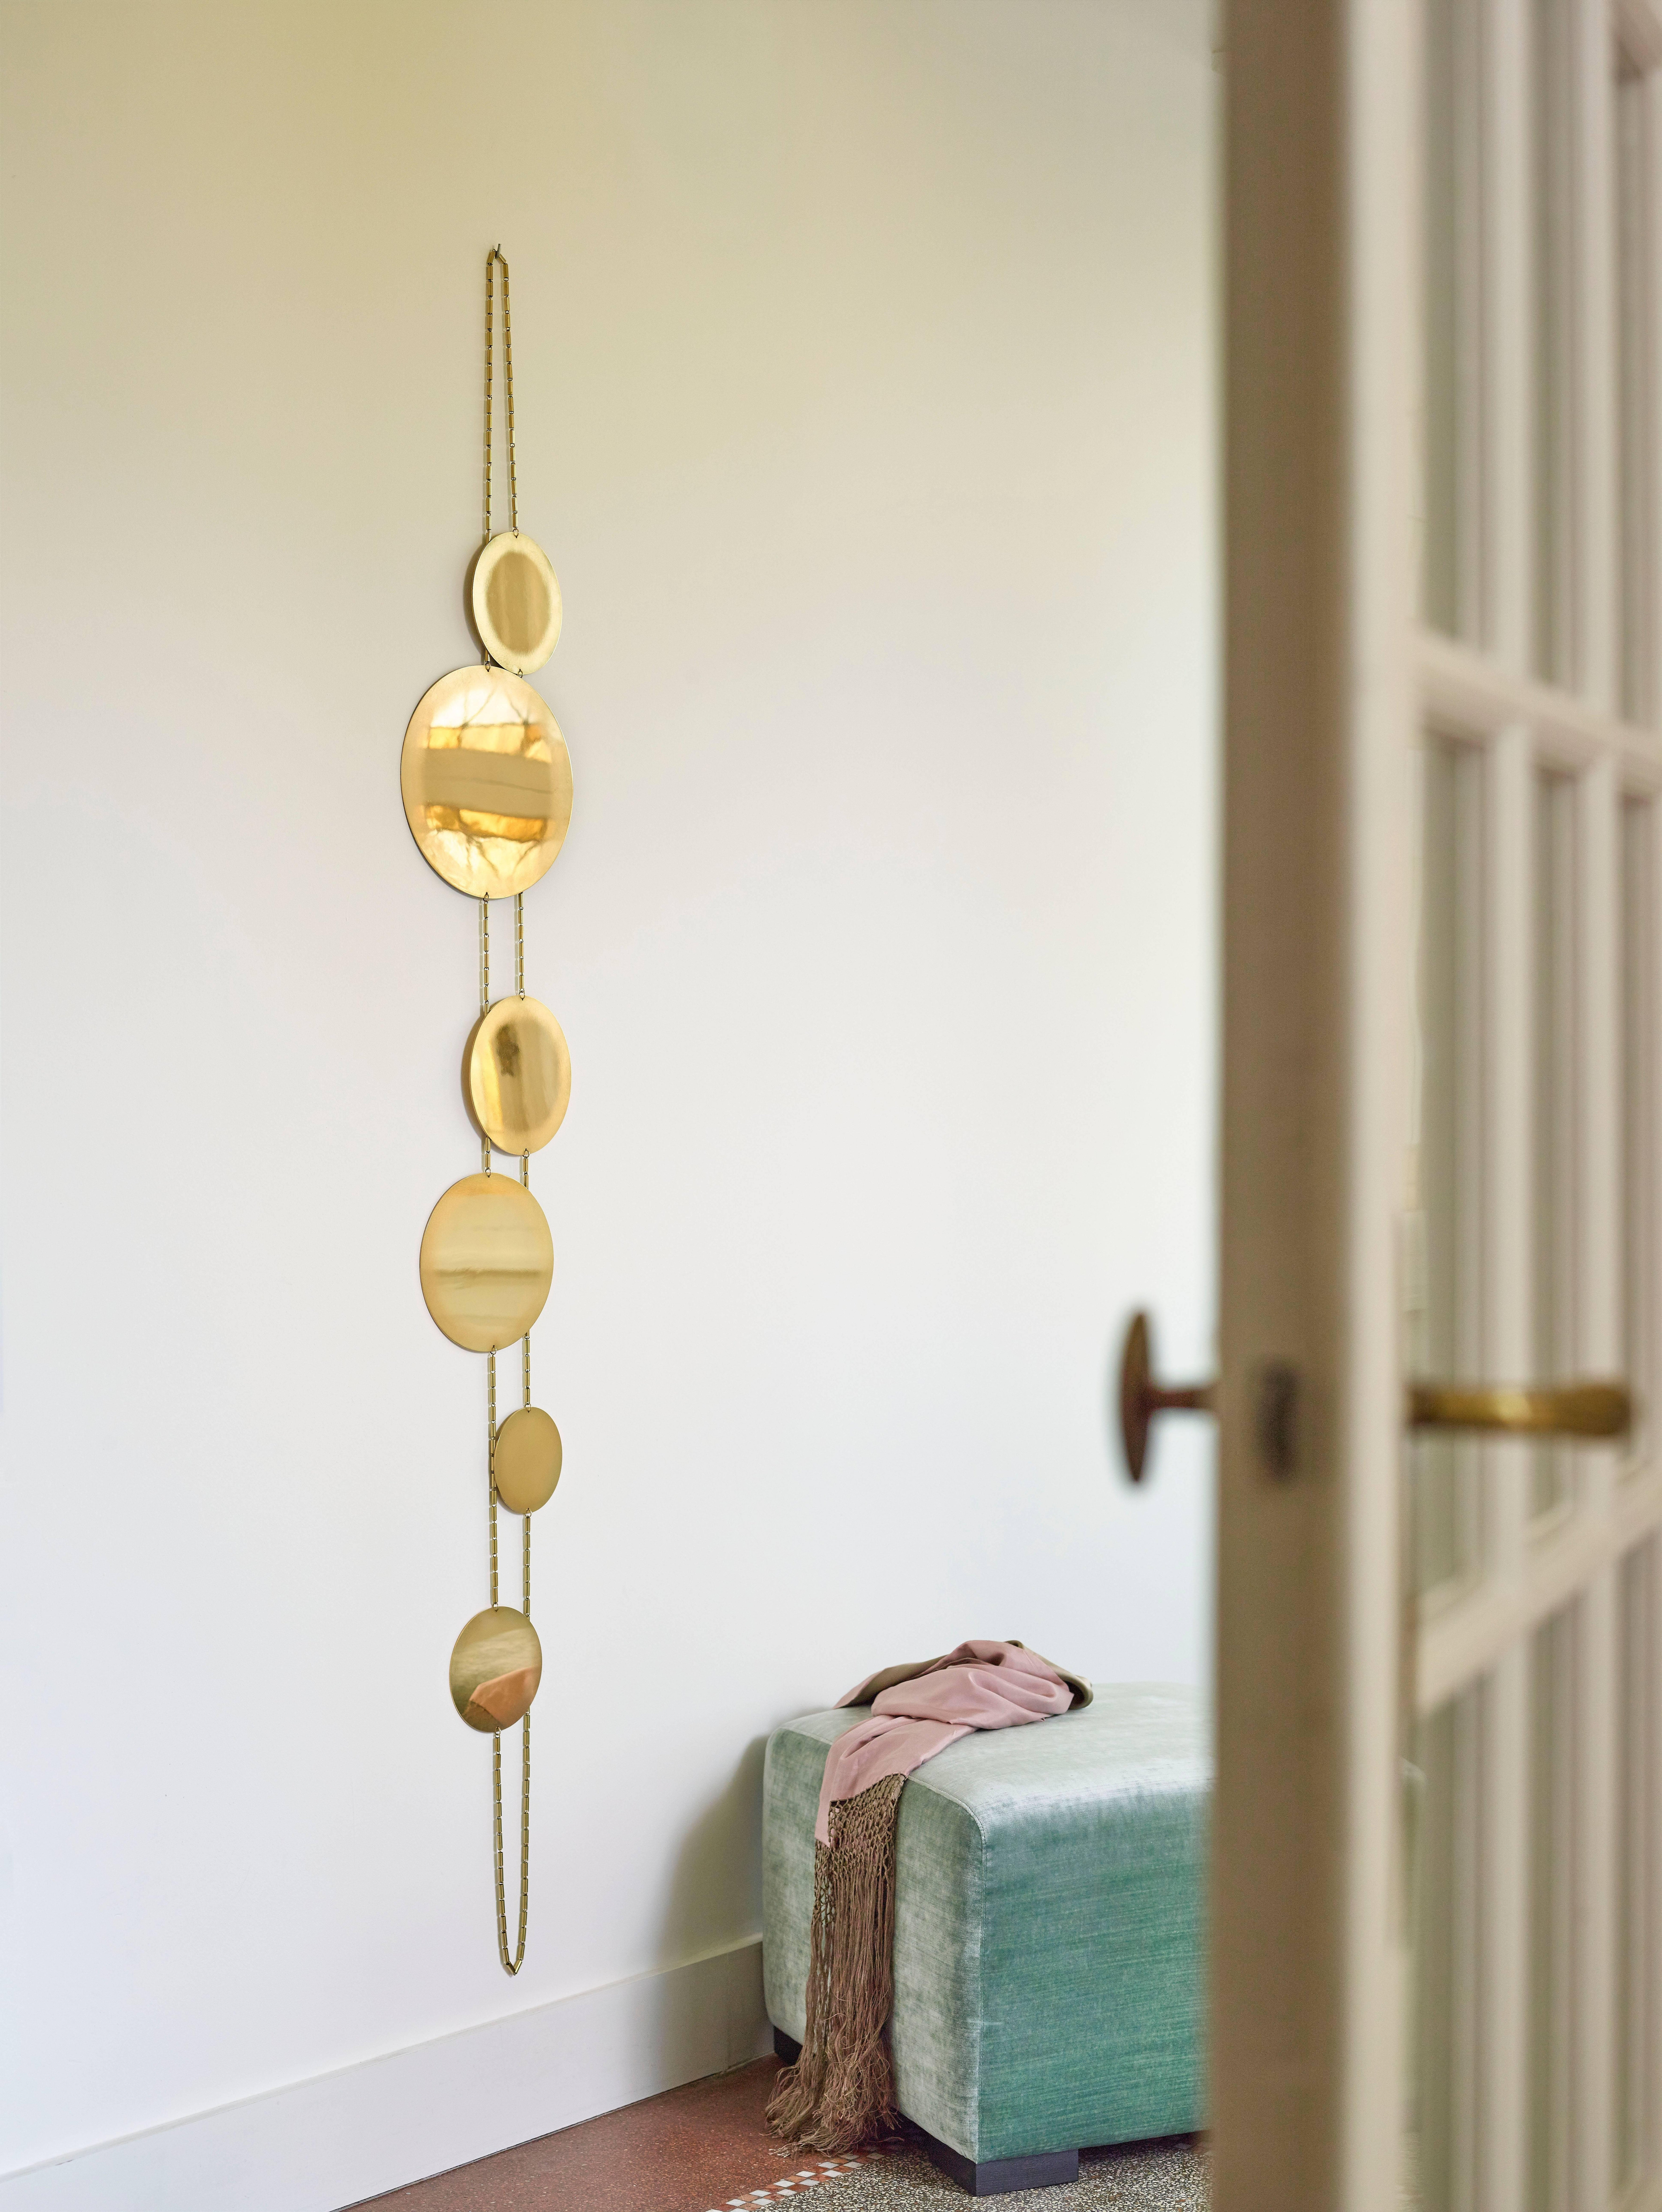 This decorative 'O' Mirror is inspired by a large-scale necklace or Sautoir.
Each disk is mirror polished and sanded on the border.
It is assembled with a brass chain.